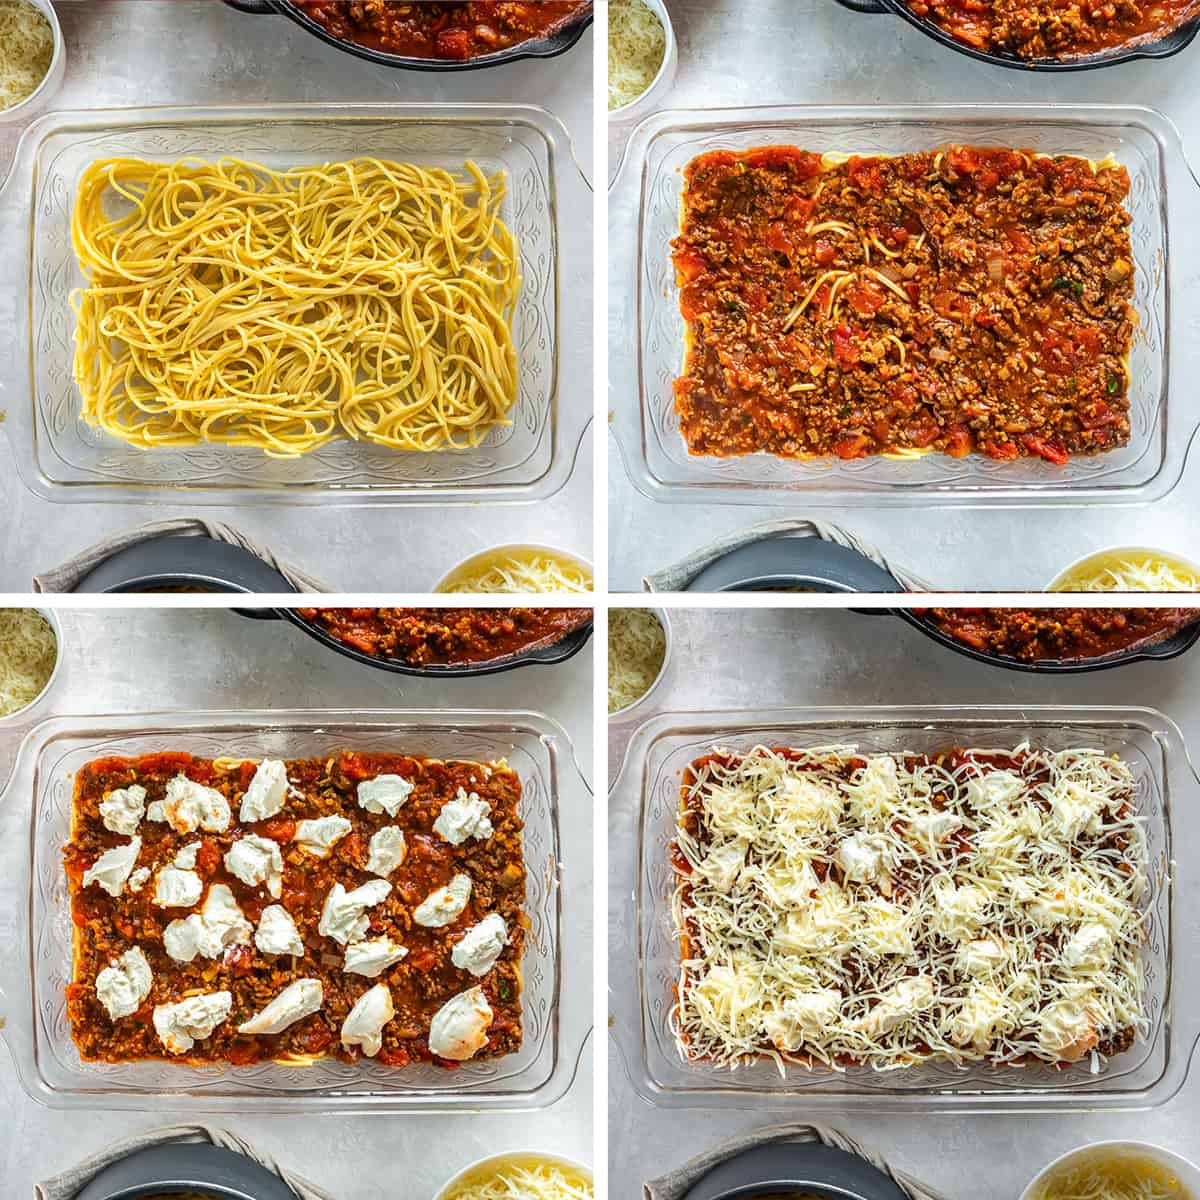 Four images showing spaghetti layered with sauce and cheese in a casserole dish.